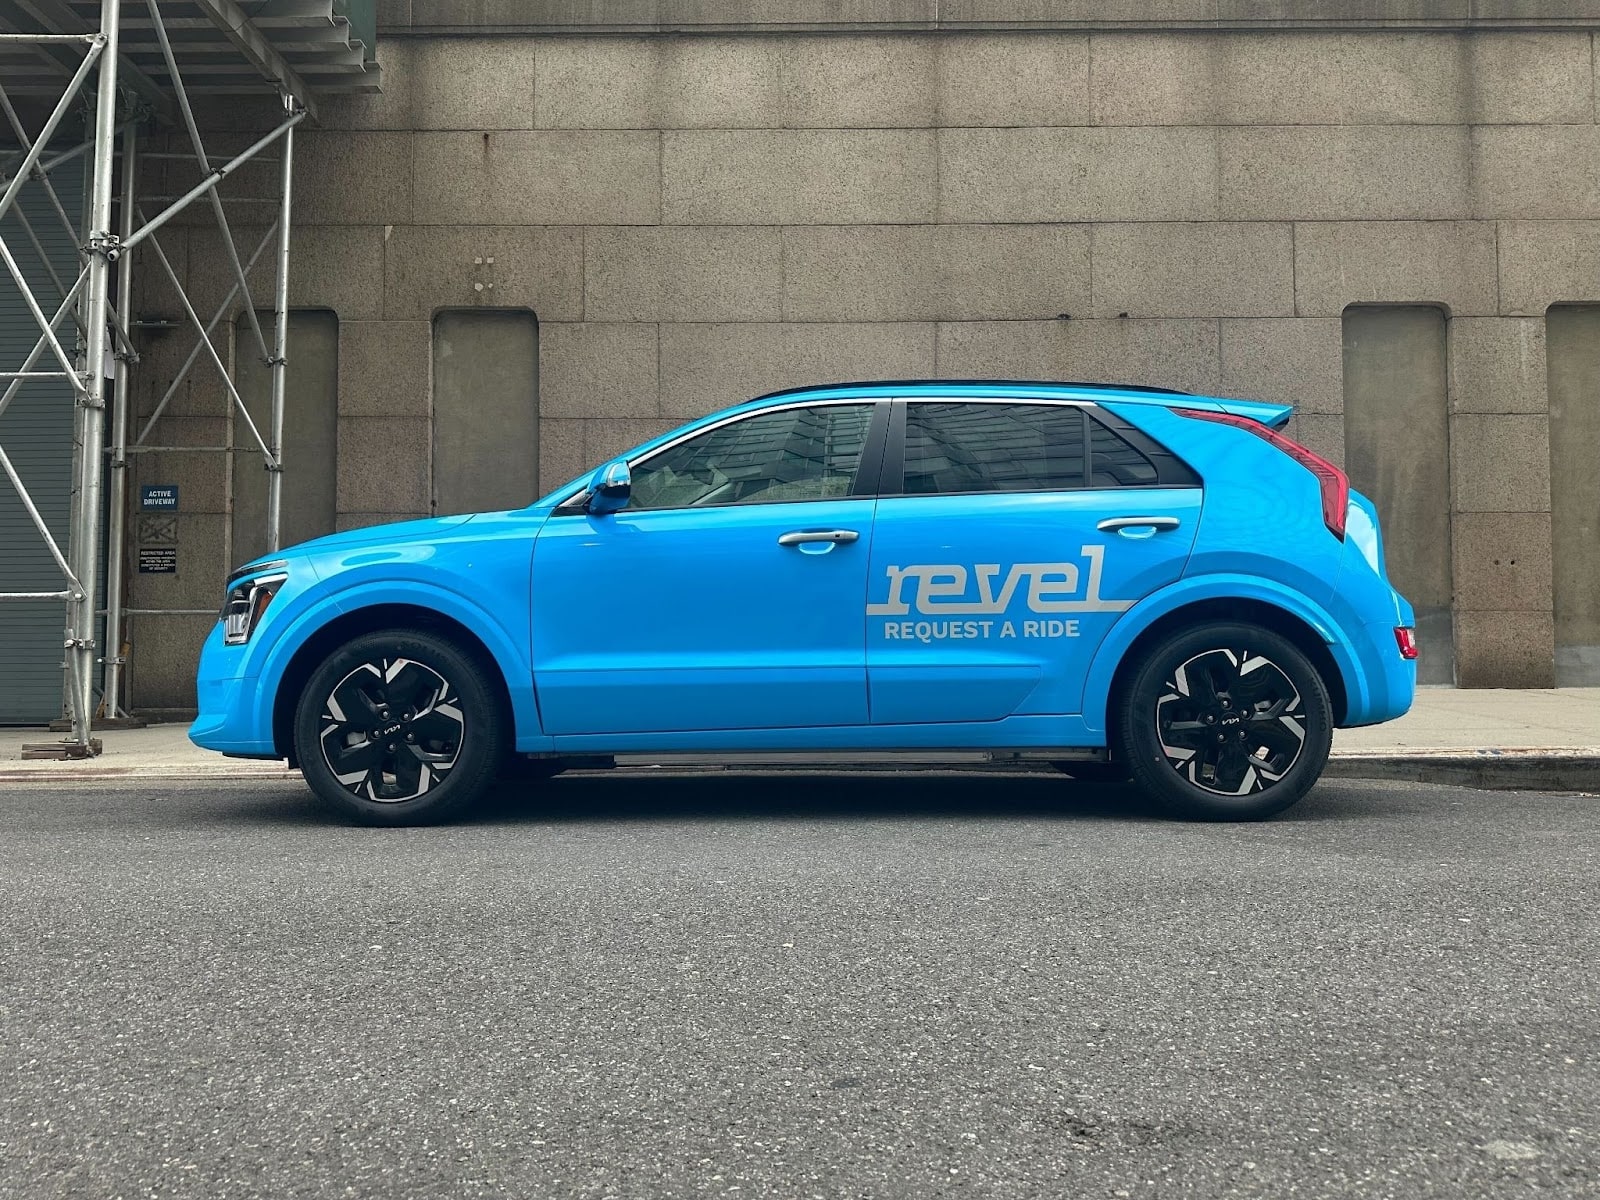 Revel expands NYC rideshare fleet with new EV joining Tesla Model Y and 3